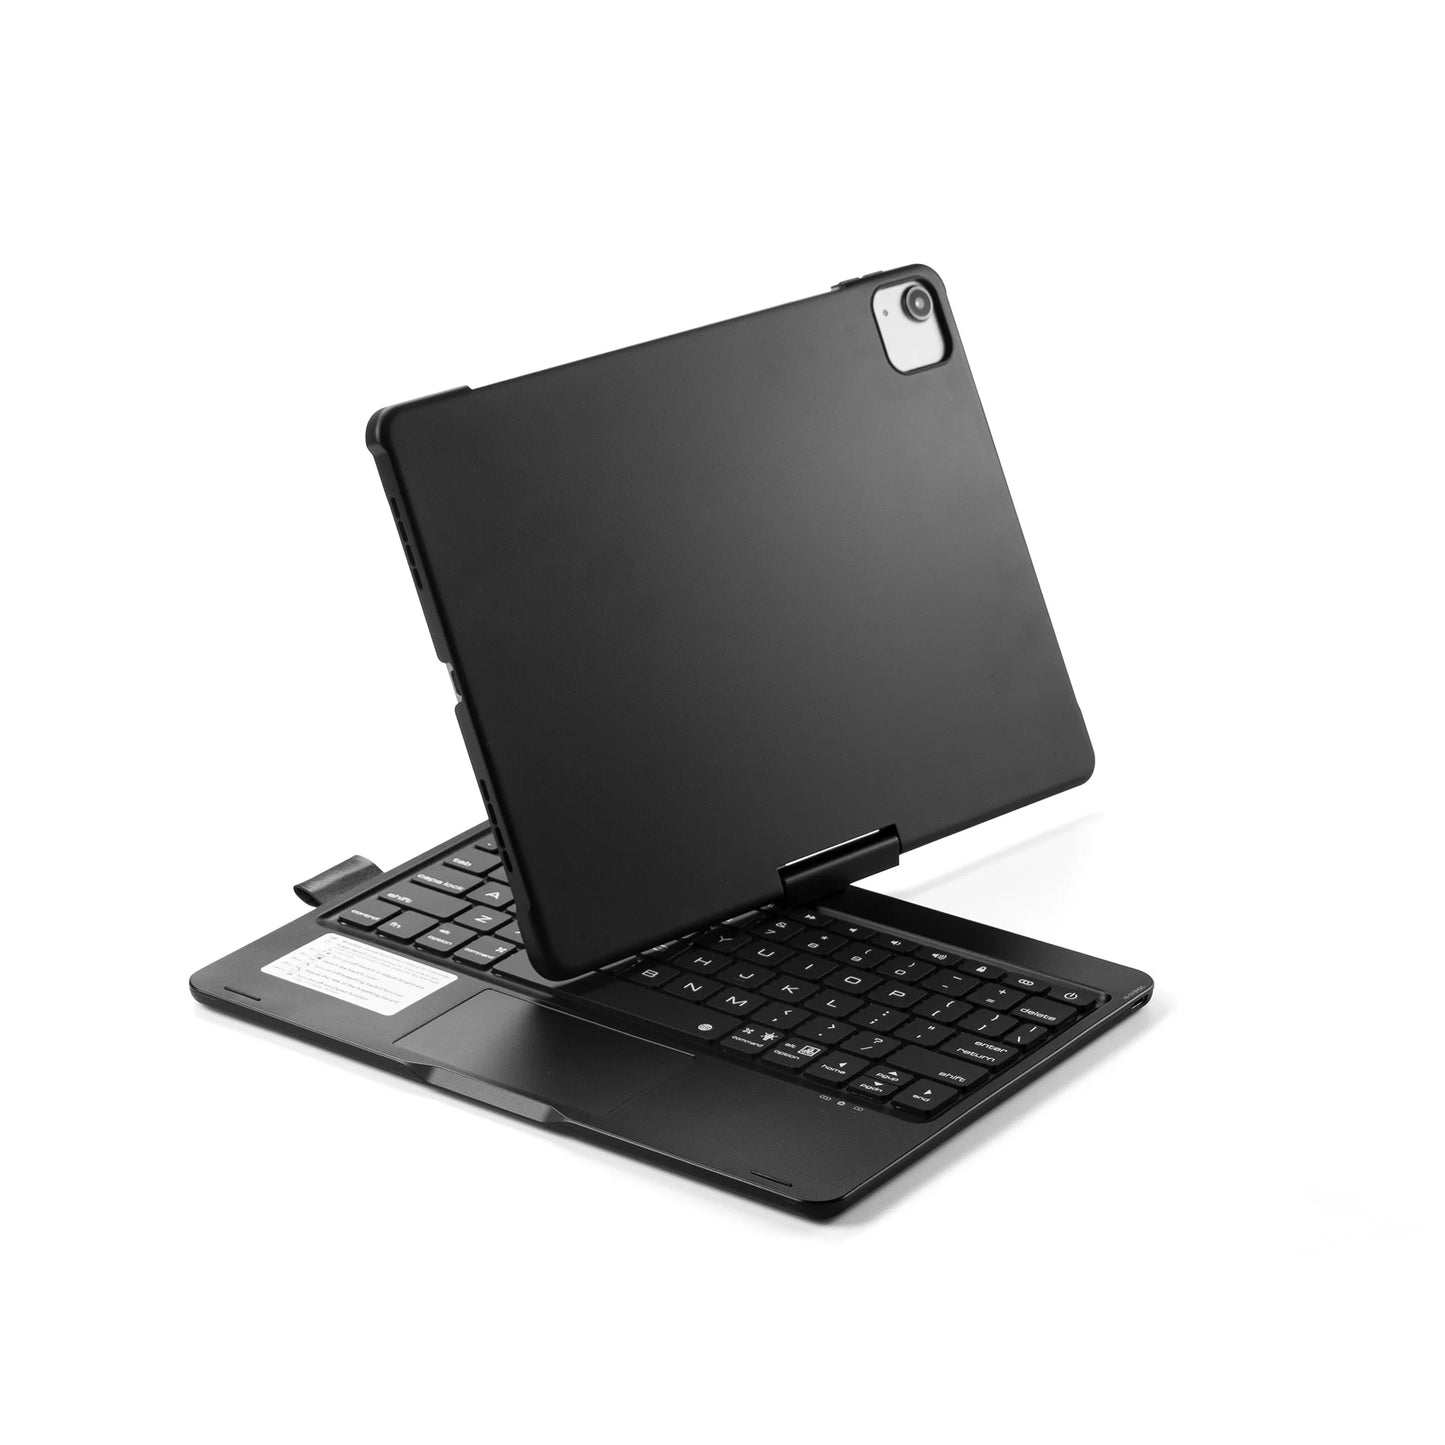 Case for iPad With Built in Keyboard & Multi Touchpad +  Screen 360° Rotation + Free Screen protector & Cleaning Kit - 🚨 86% OFF LAST DAY